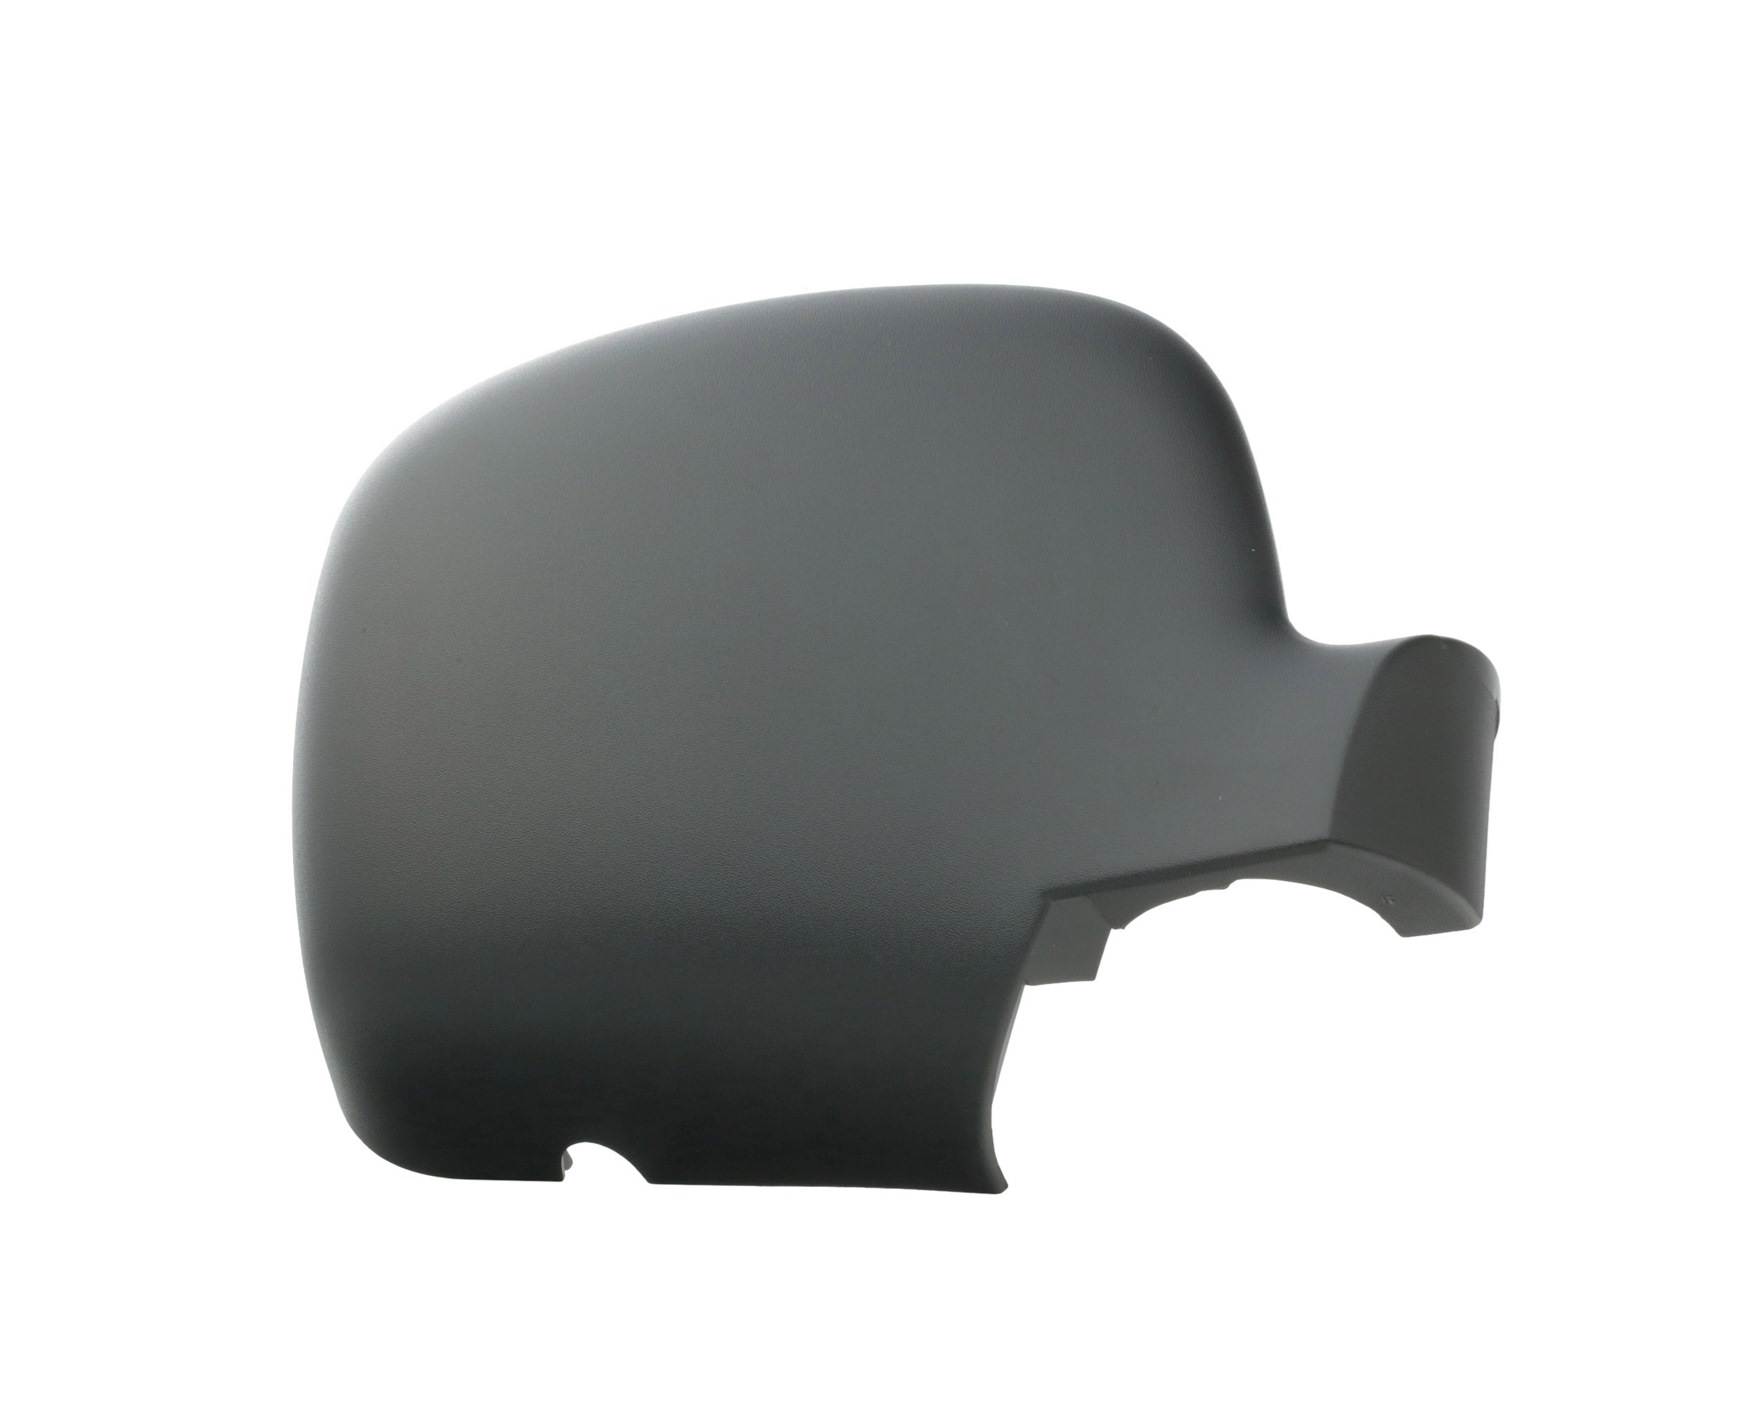 Wing mirror cover for RENAULT TRAFIC left and right cheap online